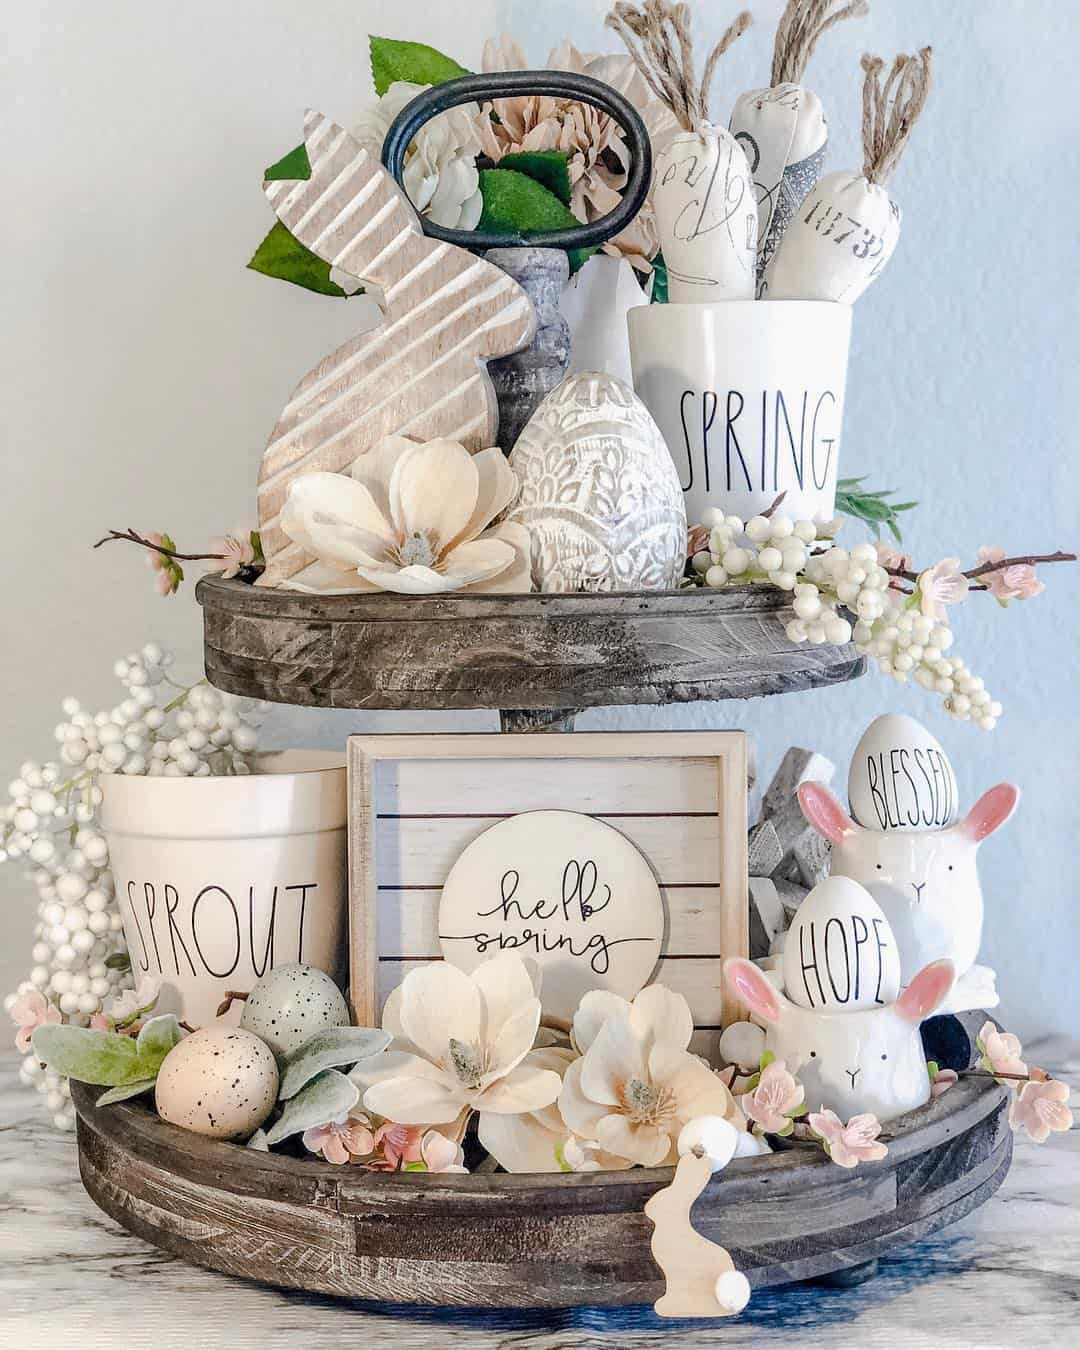 Cute Easter Picture Ideas
 25 Cute Easter Decoration Ideas To Spruce Up Your Home